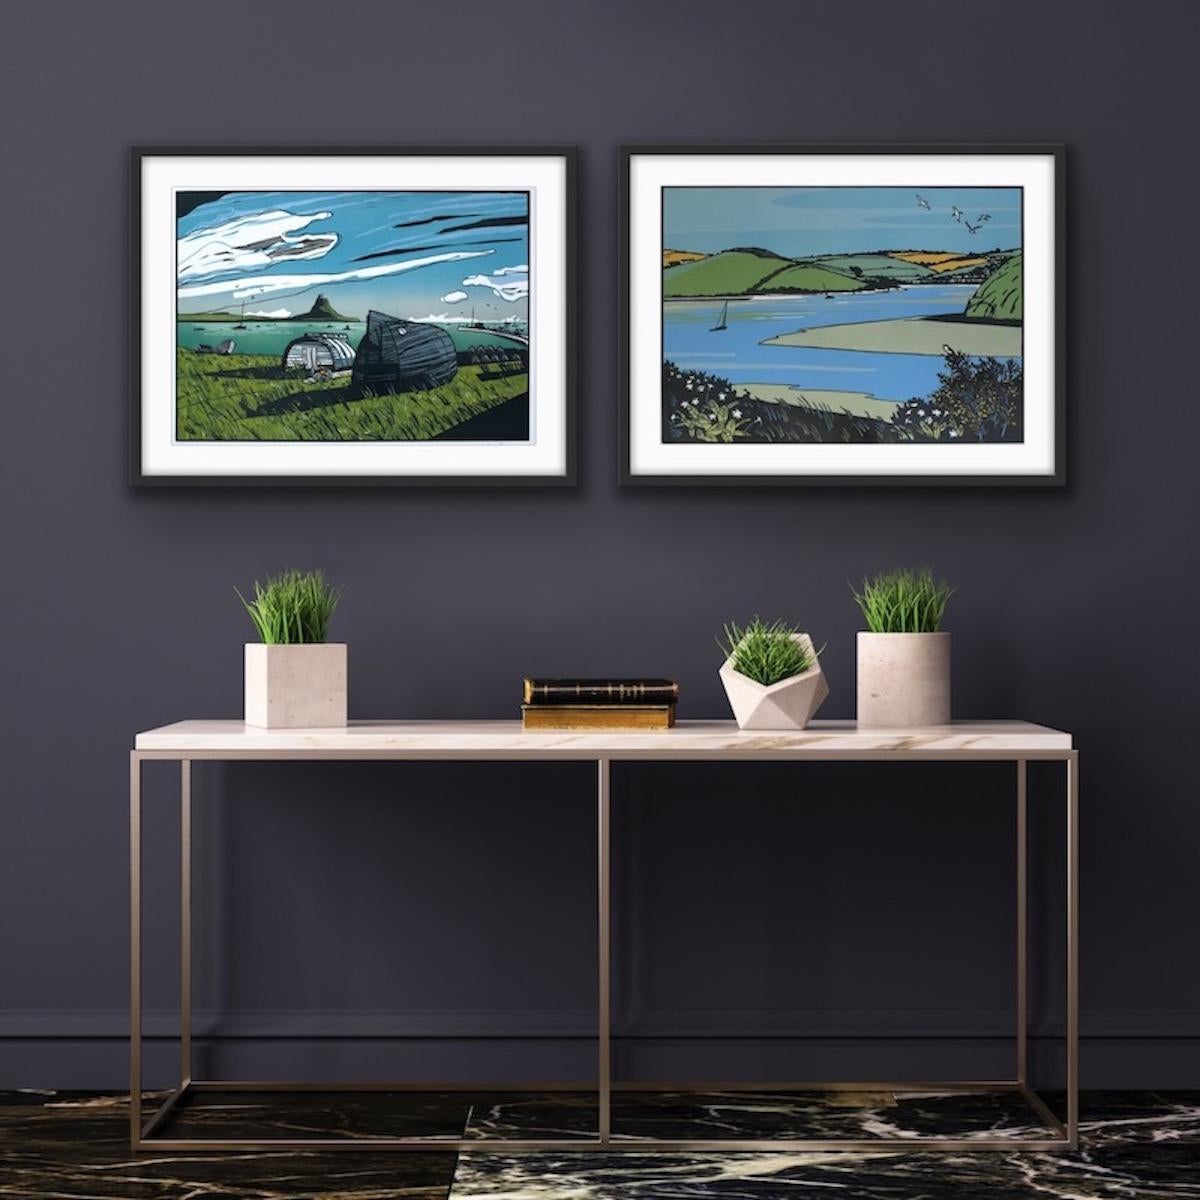 Lindisfarne and The Camel Trail Diptych - Contemporary Print by Colin Moore